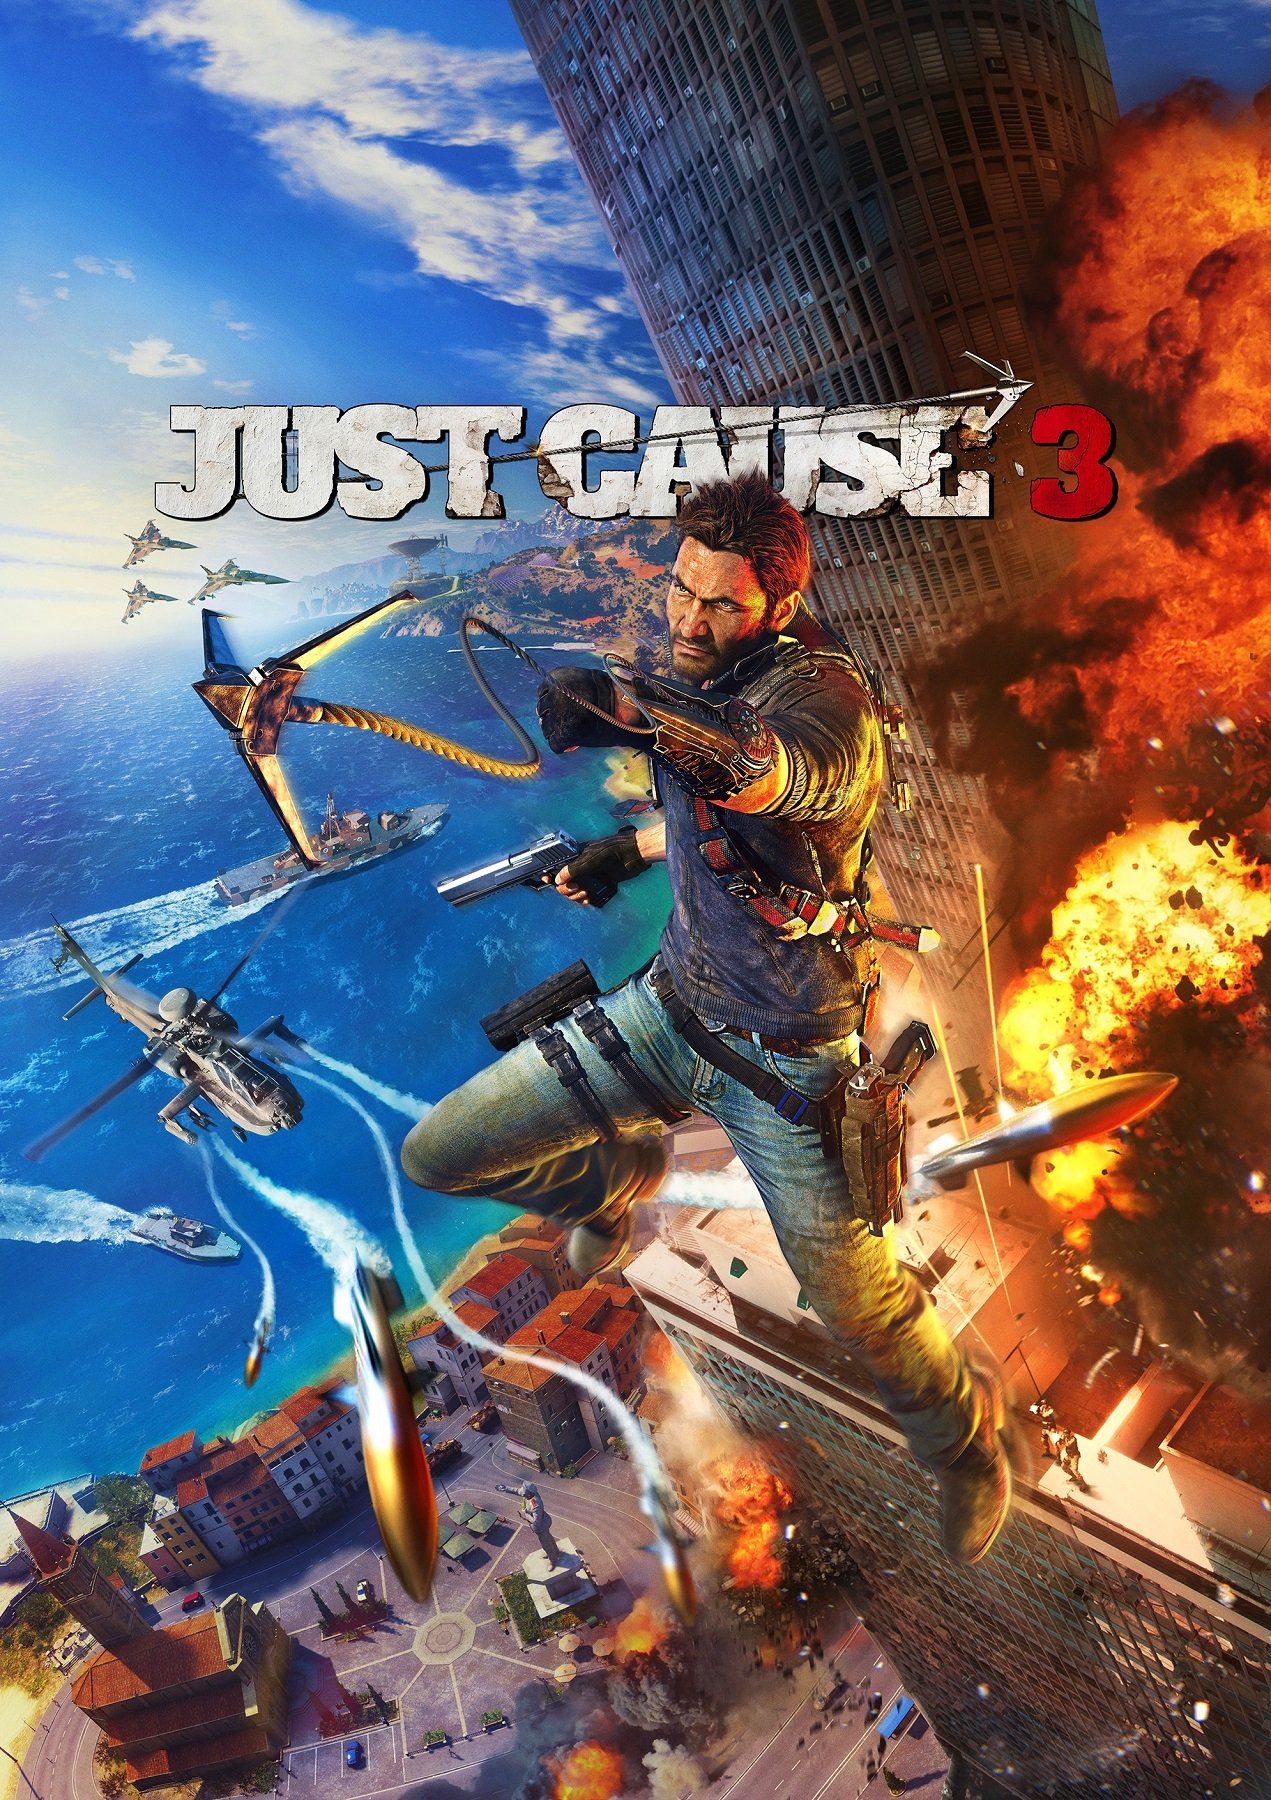 Gaming posters. Just cause 3. Игра just cause 3. Just cause 3 обложка. Игра just cause 4.